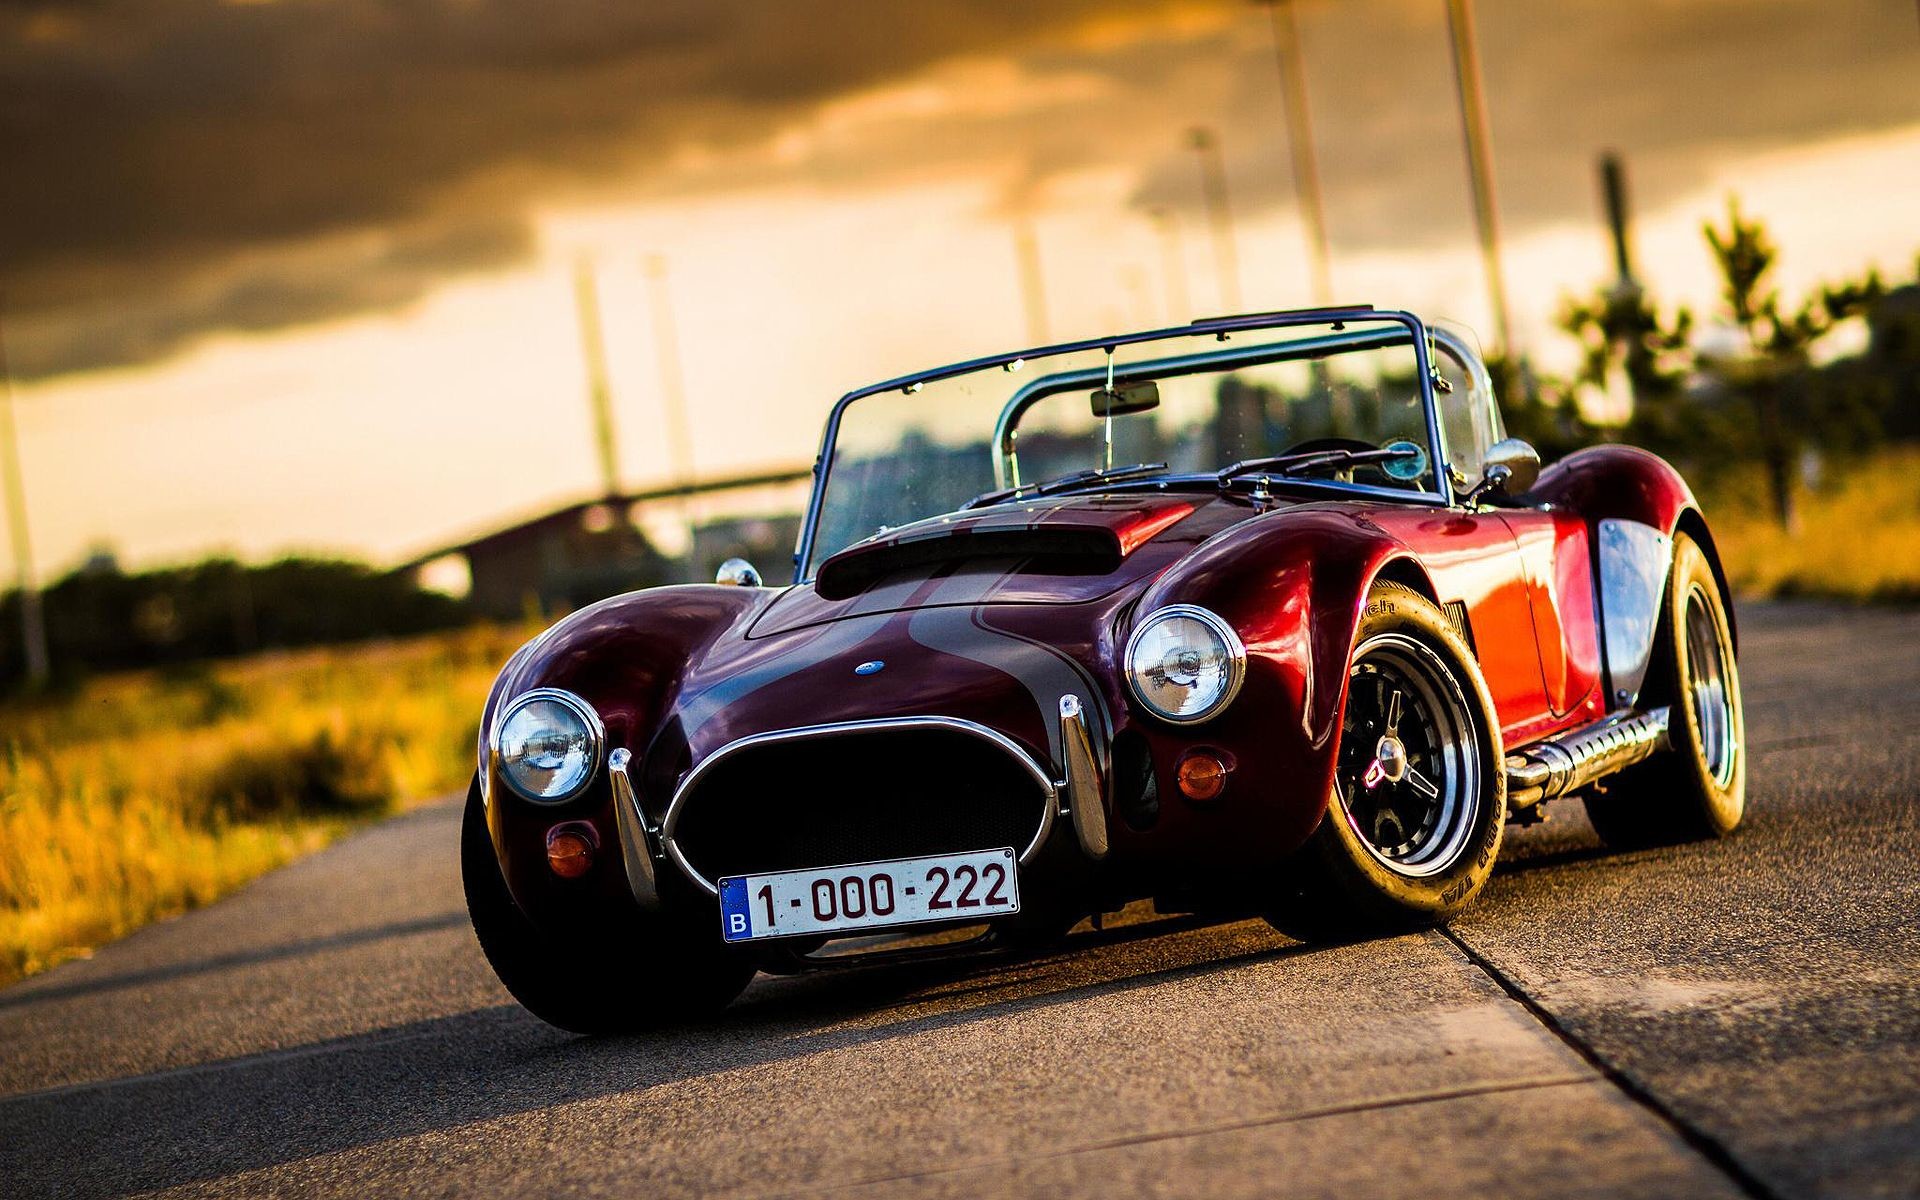 6213_Old-classic-car-small-AC-Cobra-on-the-road